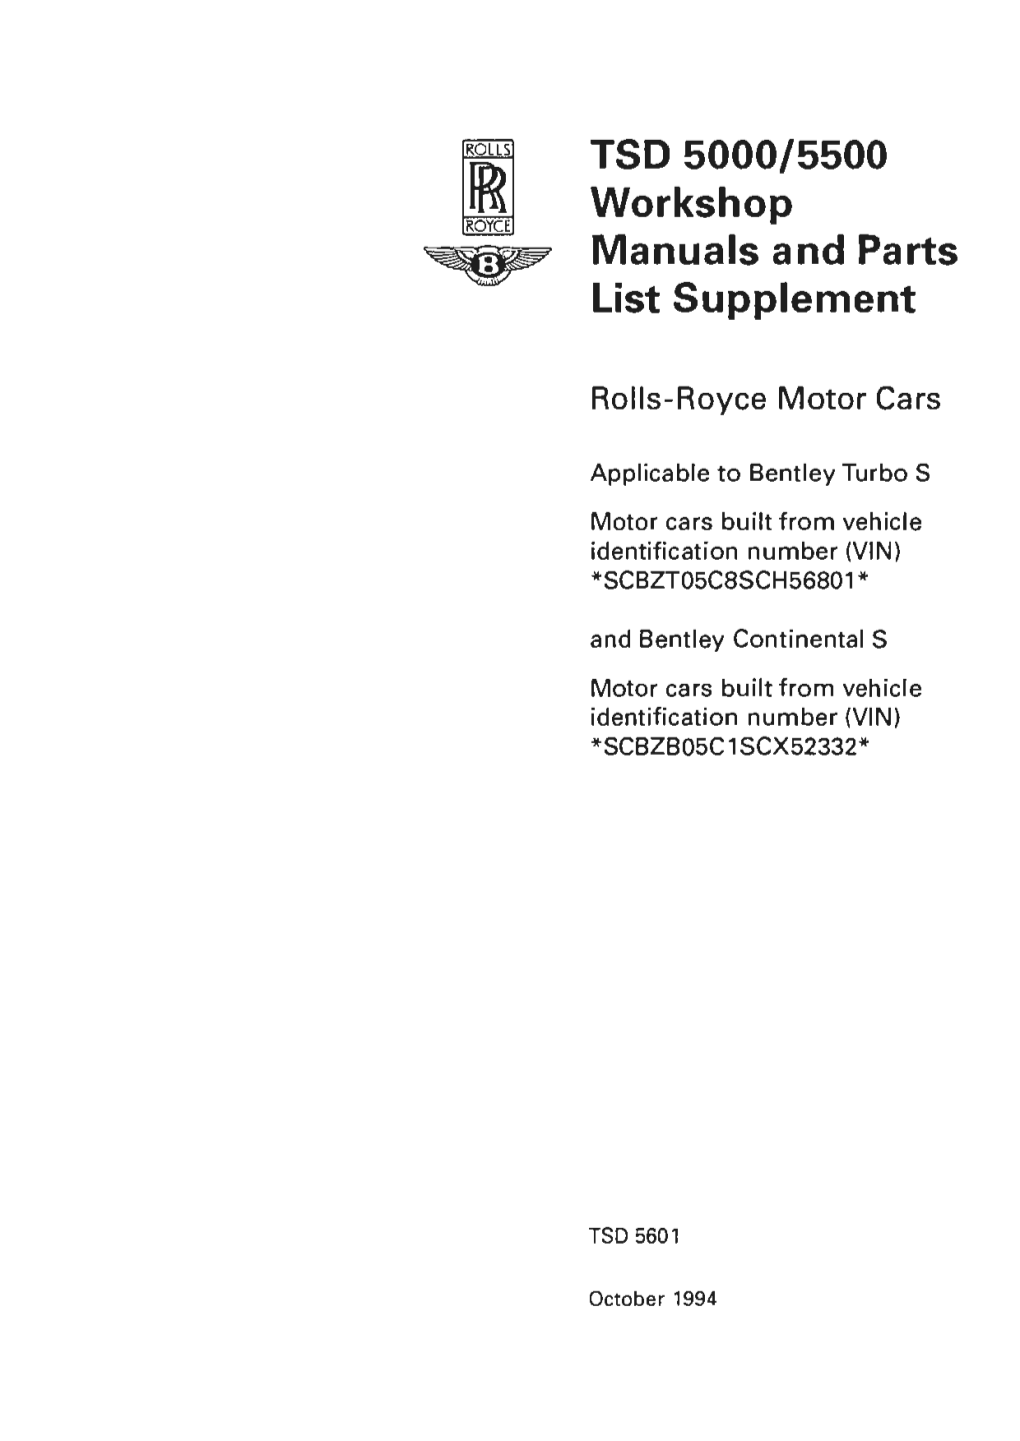 TSD 5000/5500 Workshop Manuals and Parts List Supplement